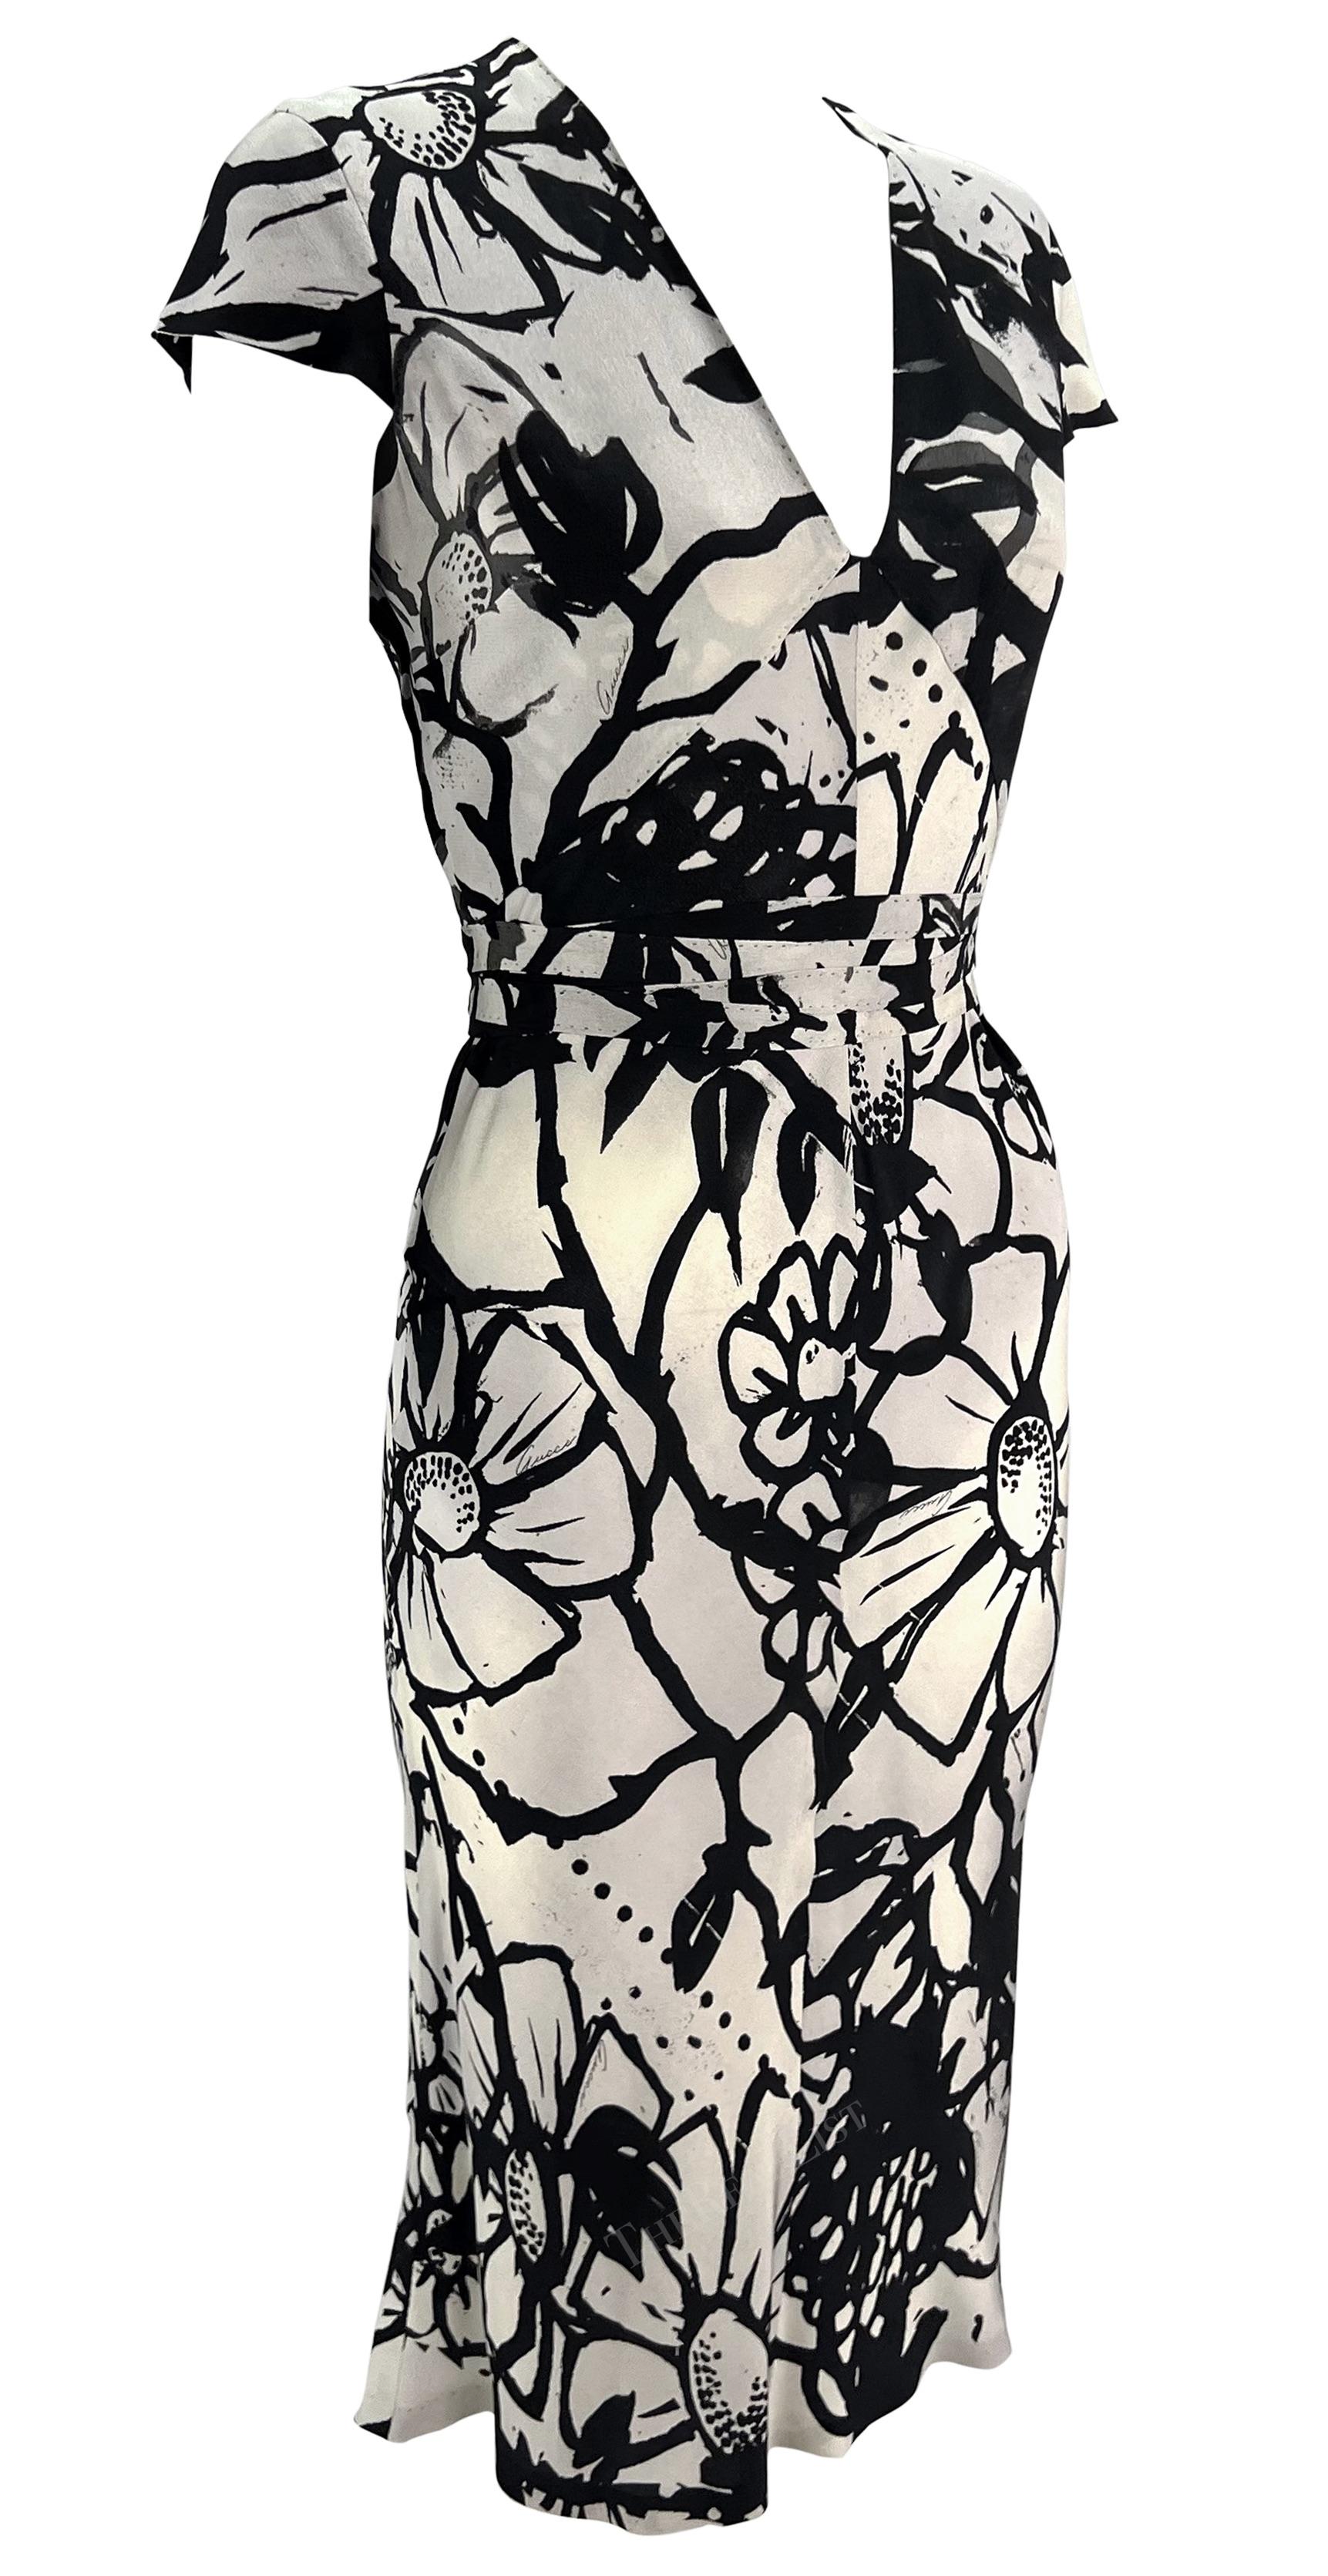 2003 Gucci by Tom Ford Grey Silk Floral Print Tie Dress For Sale 2